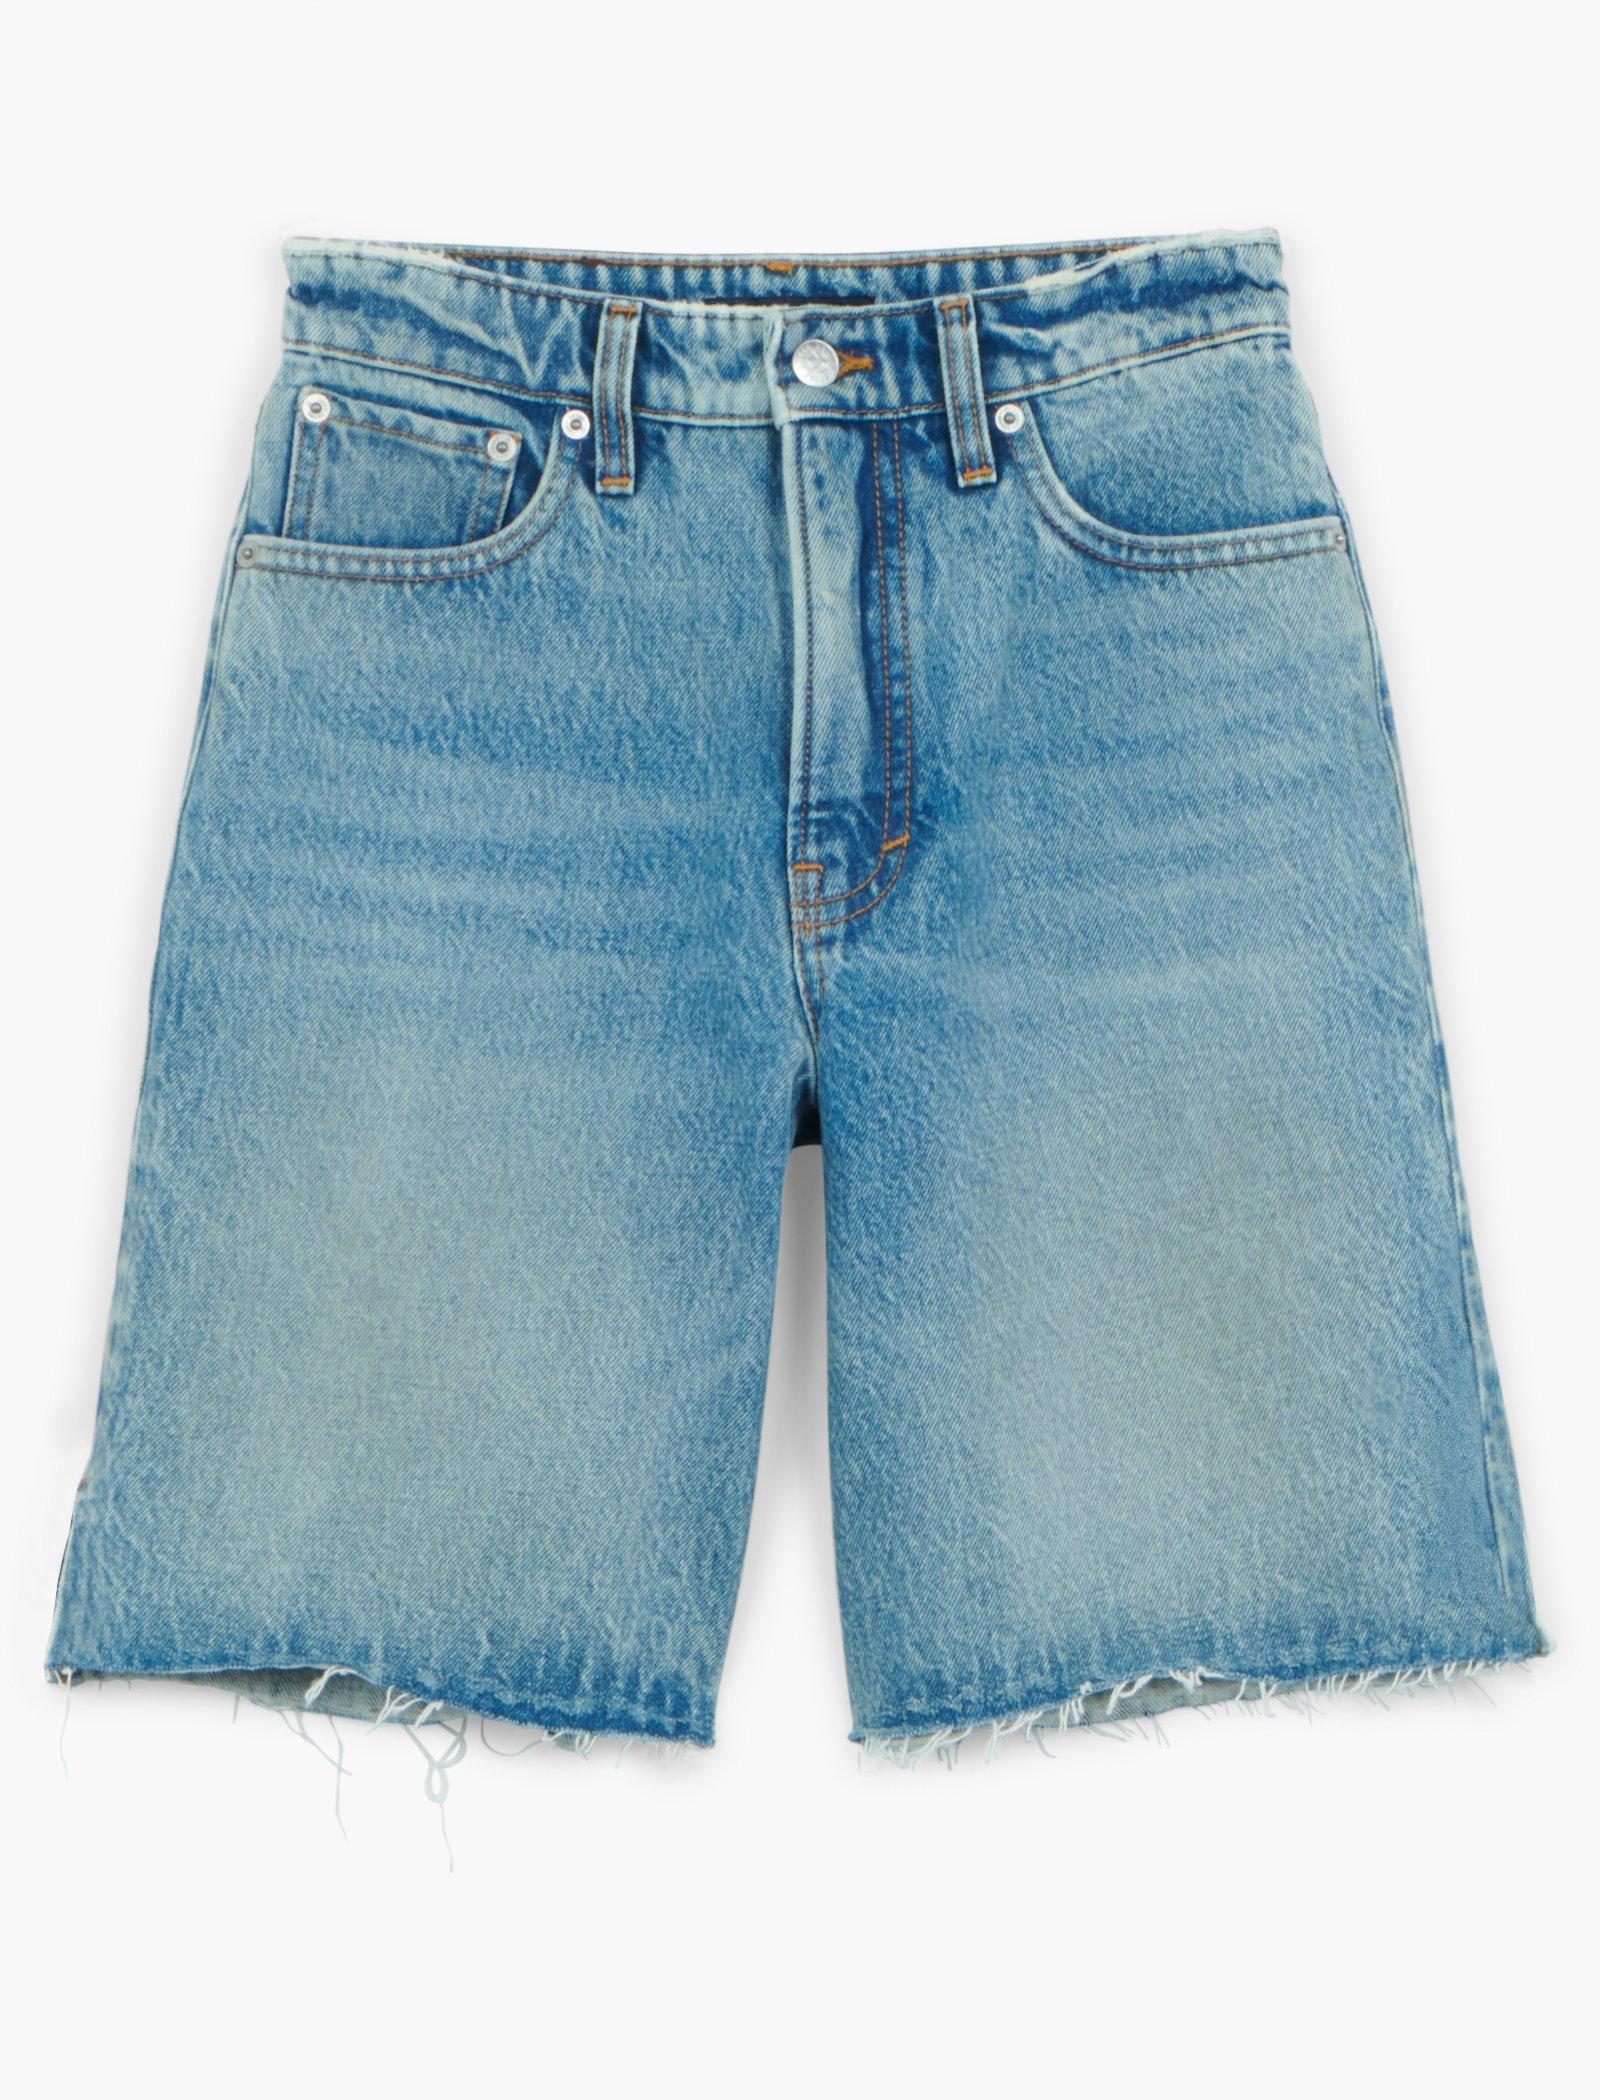 relaxed jean shorts